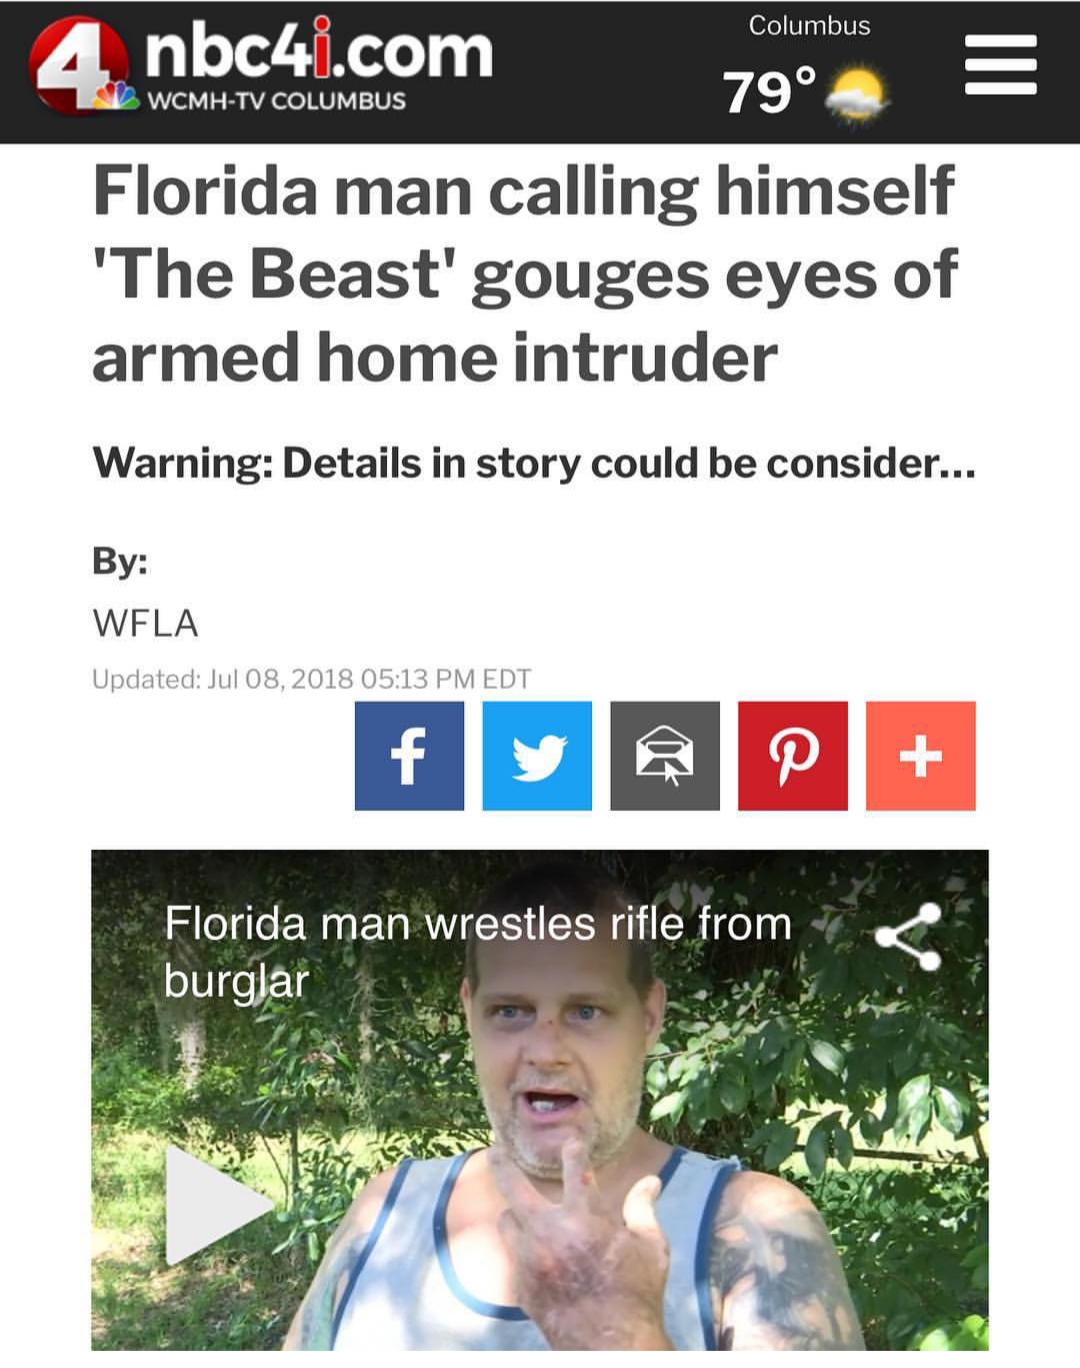 screenshot - Columbus 4 nbc4i.com WcmhTv Columbus 79 Florida man calling himself 'The Beast' gouges eyes of armed home intruder Warning Details in story could be consider... By Wfla Updated Edt Florida man wrestles rifle from burglar